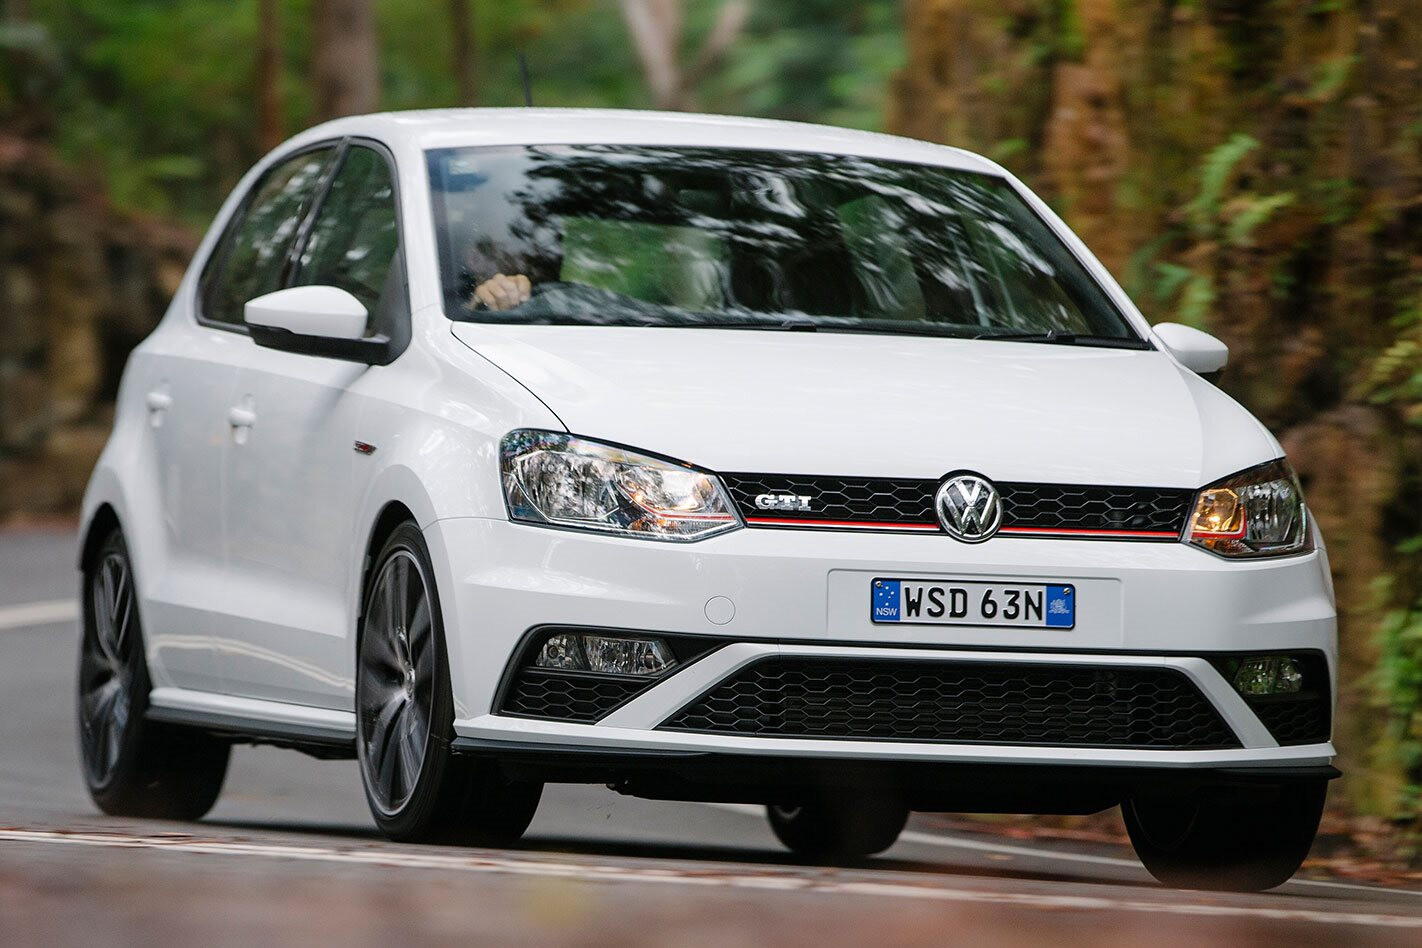 ruimte soep temperament Volkswagen Polo Review | 2015, 2016, 2017 | Features and specs | WhichCar